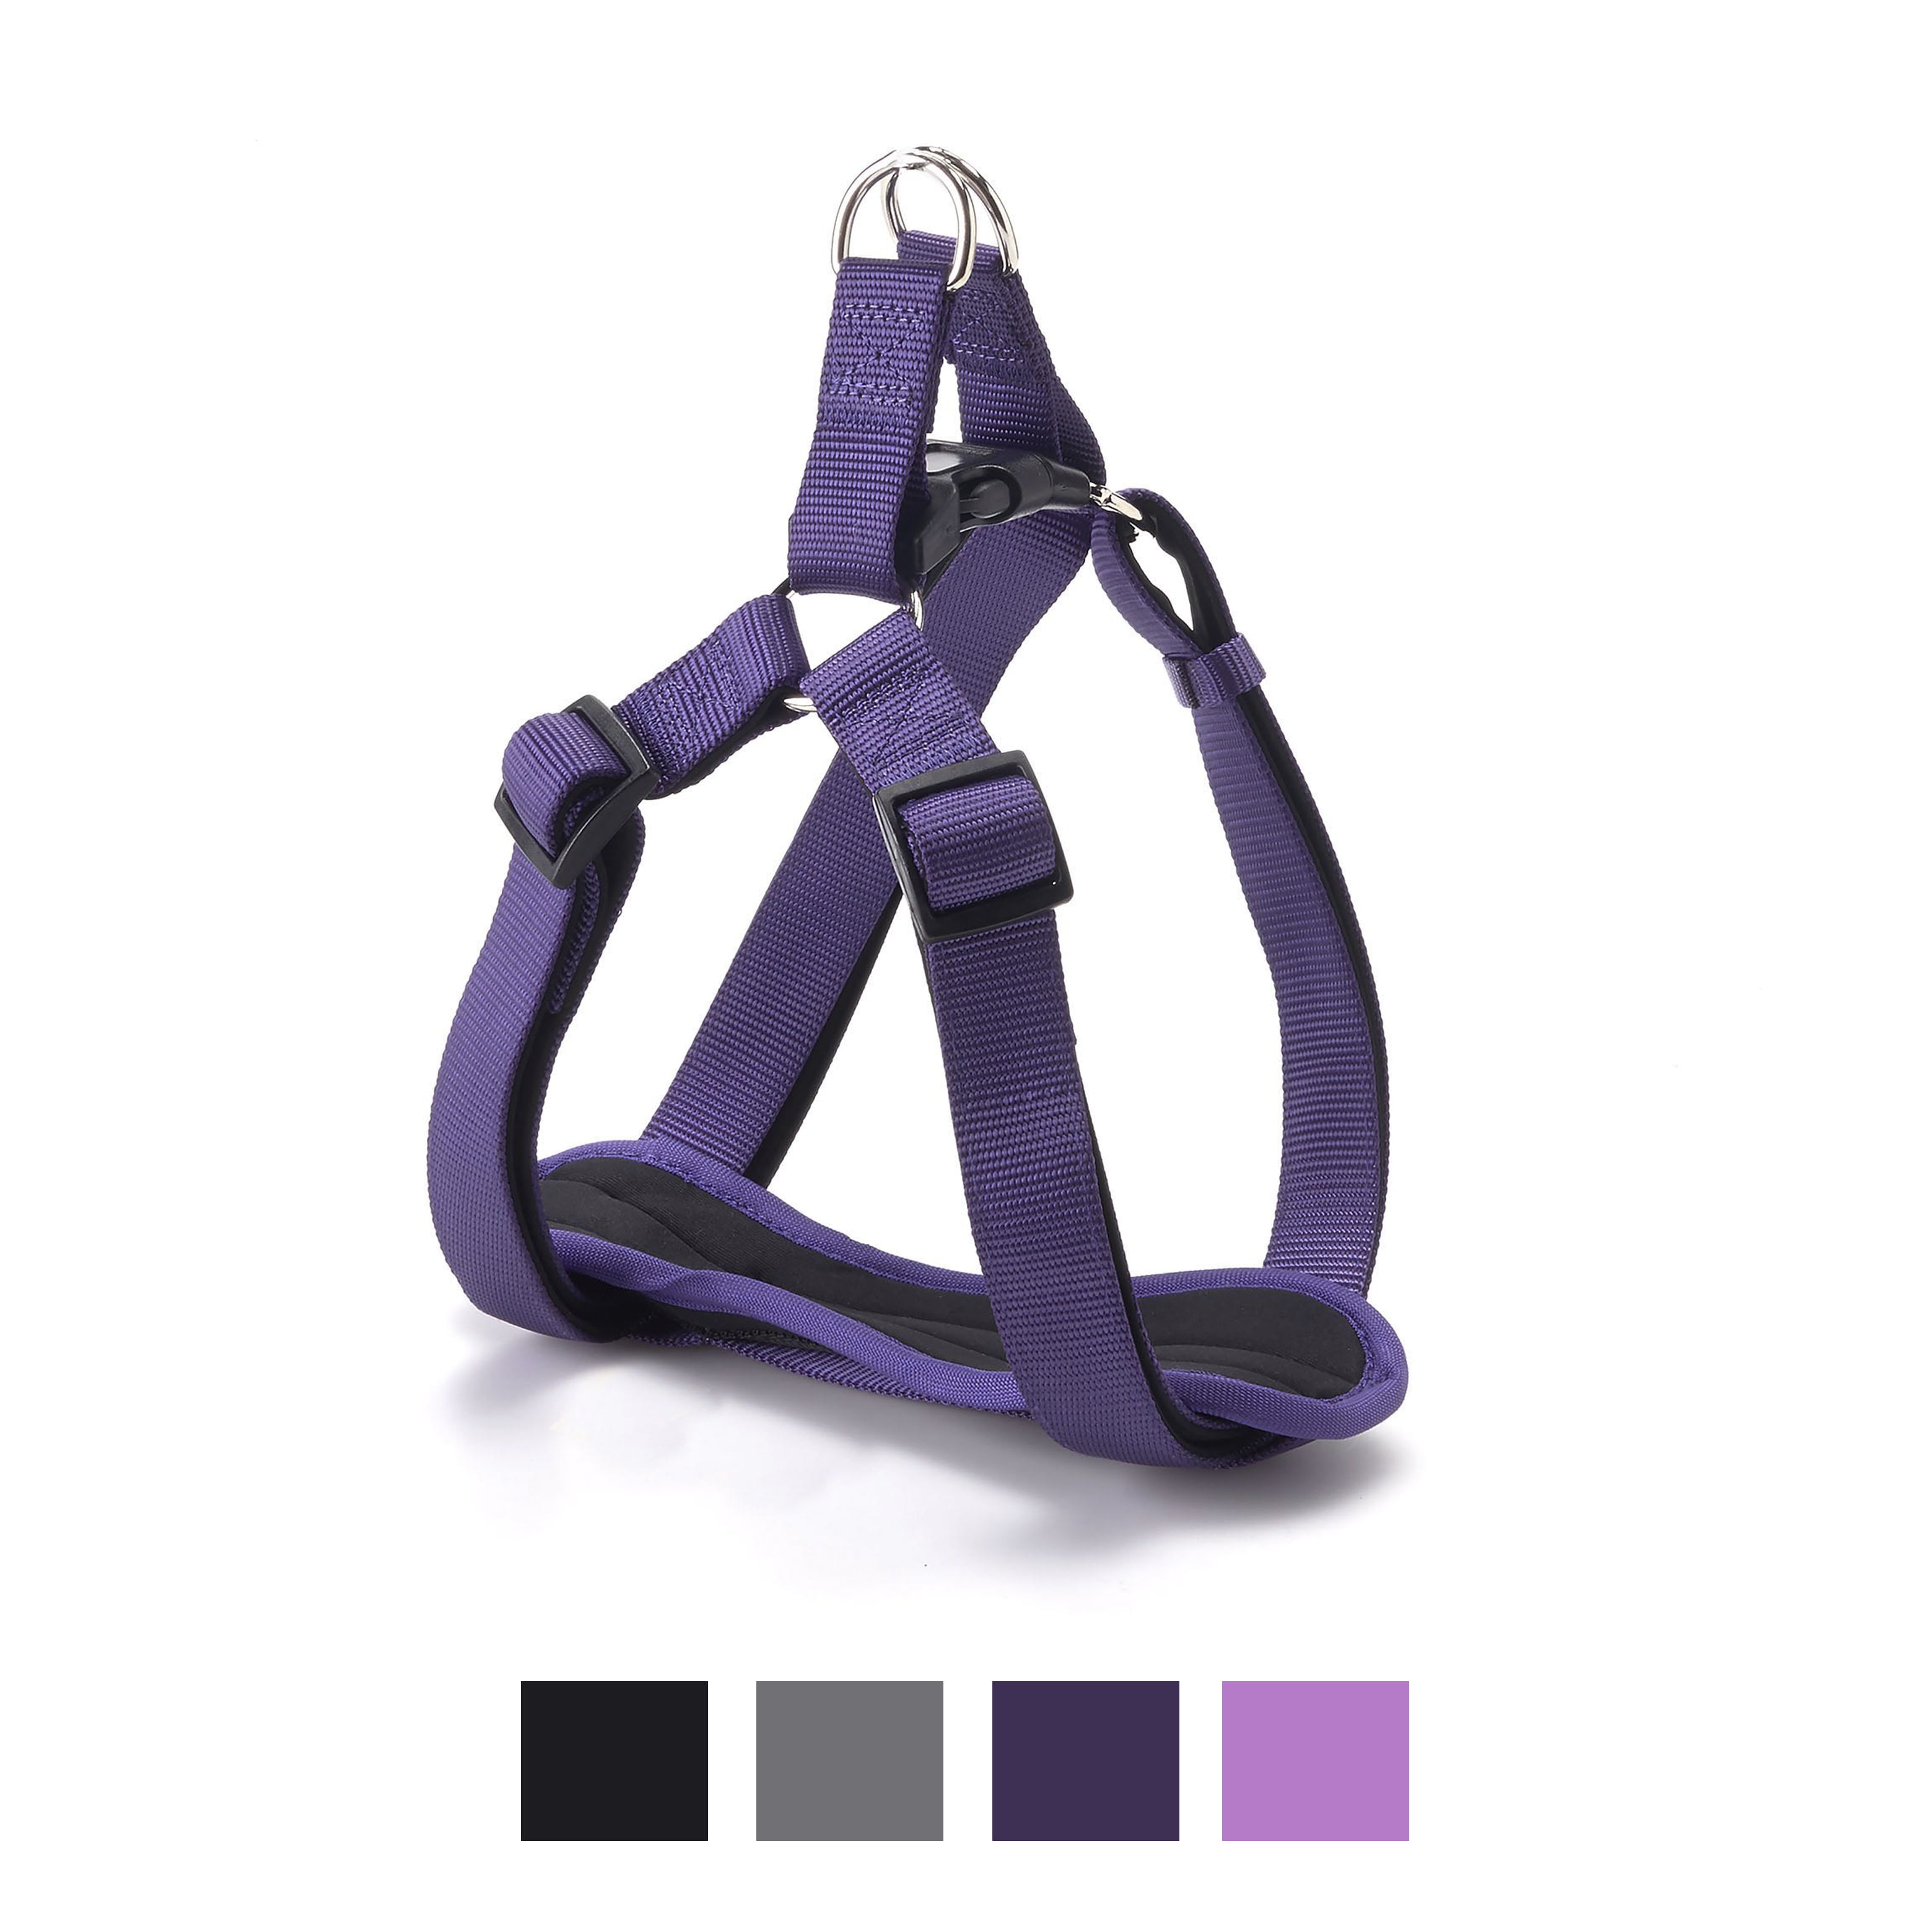 padded harness for large dogs